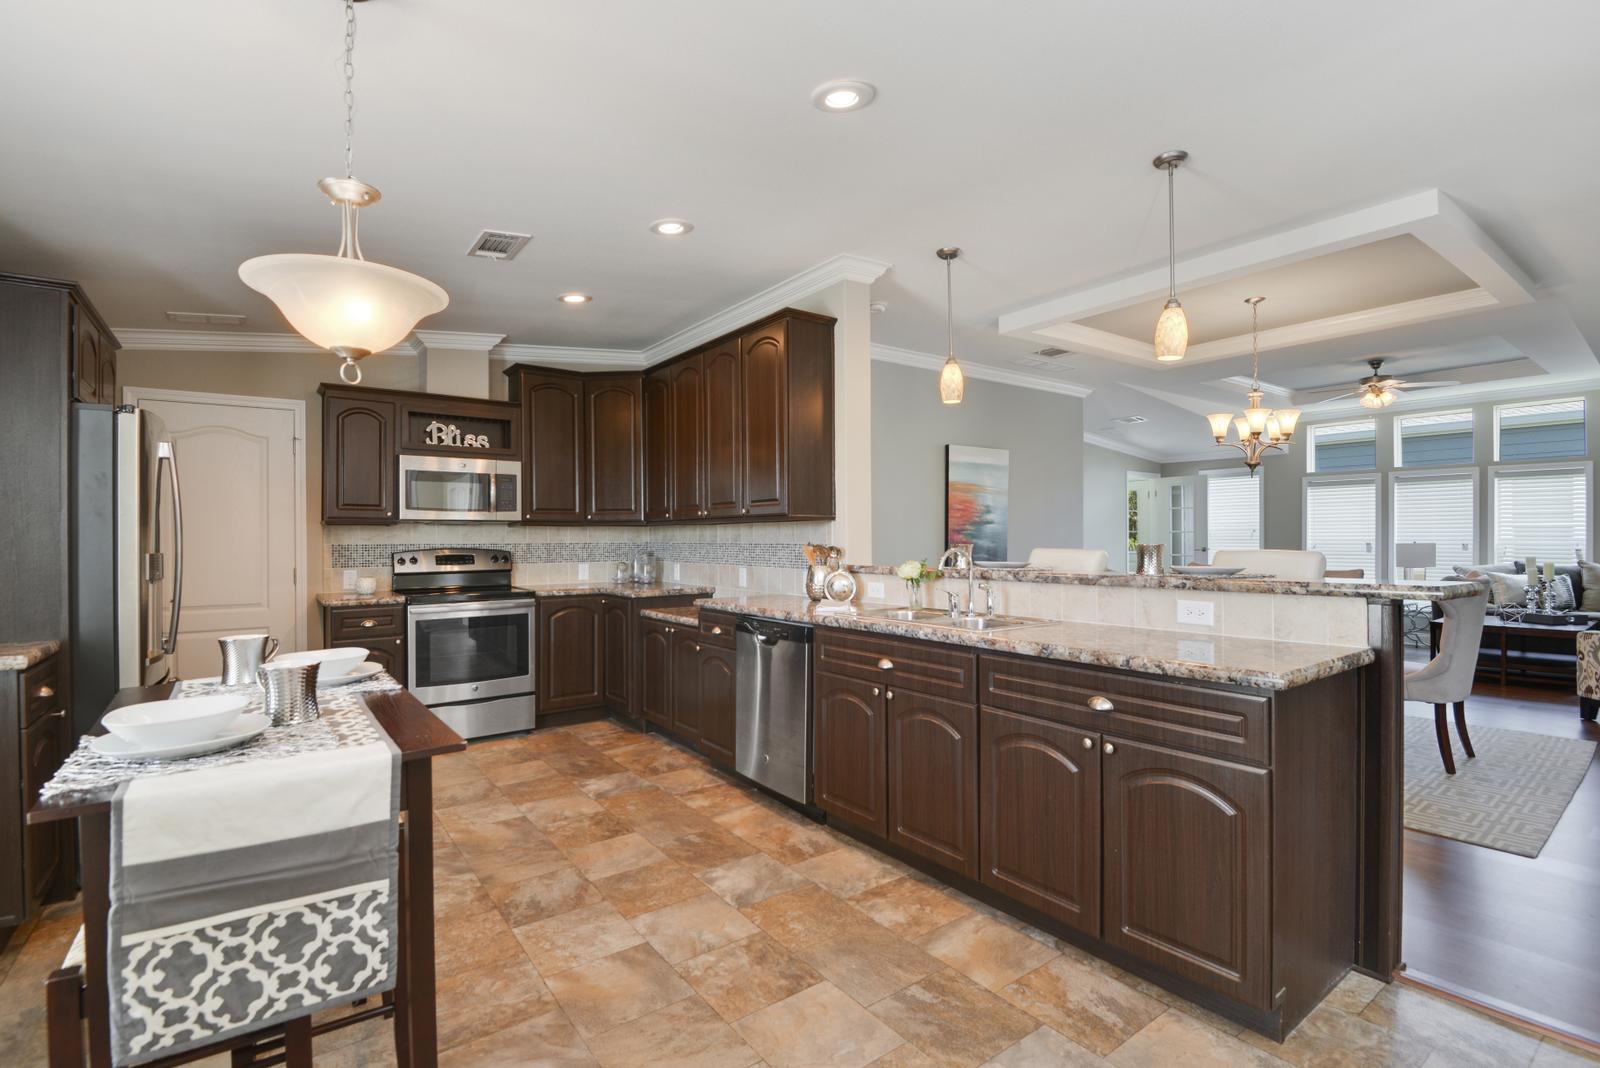 Beautiful new kitchen with dark wood cabinets and granite countertops. Stainless steel appliances. Recessed lighting and tile flooring. Opens up into living room.